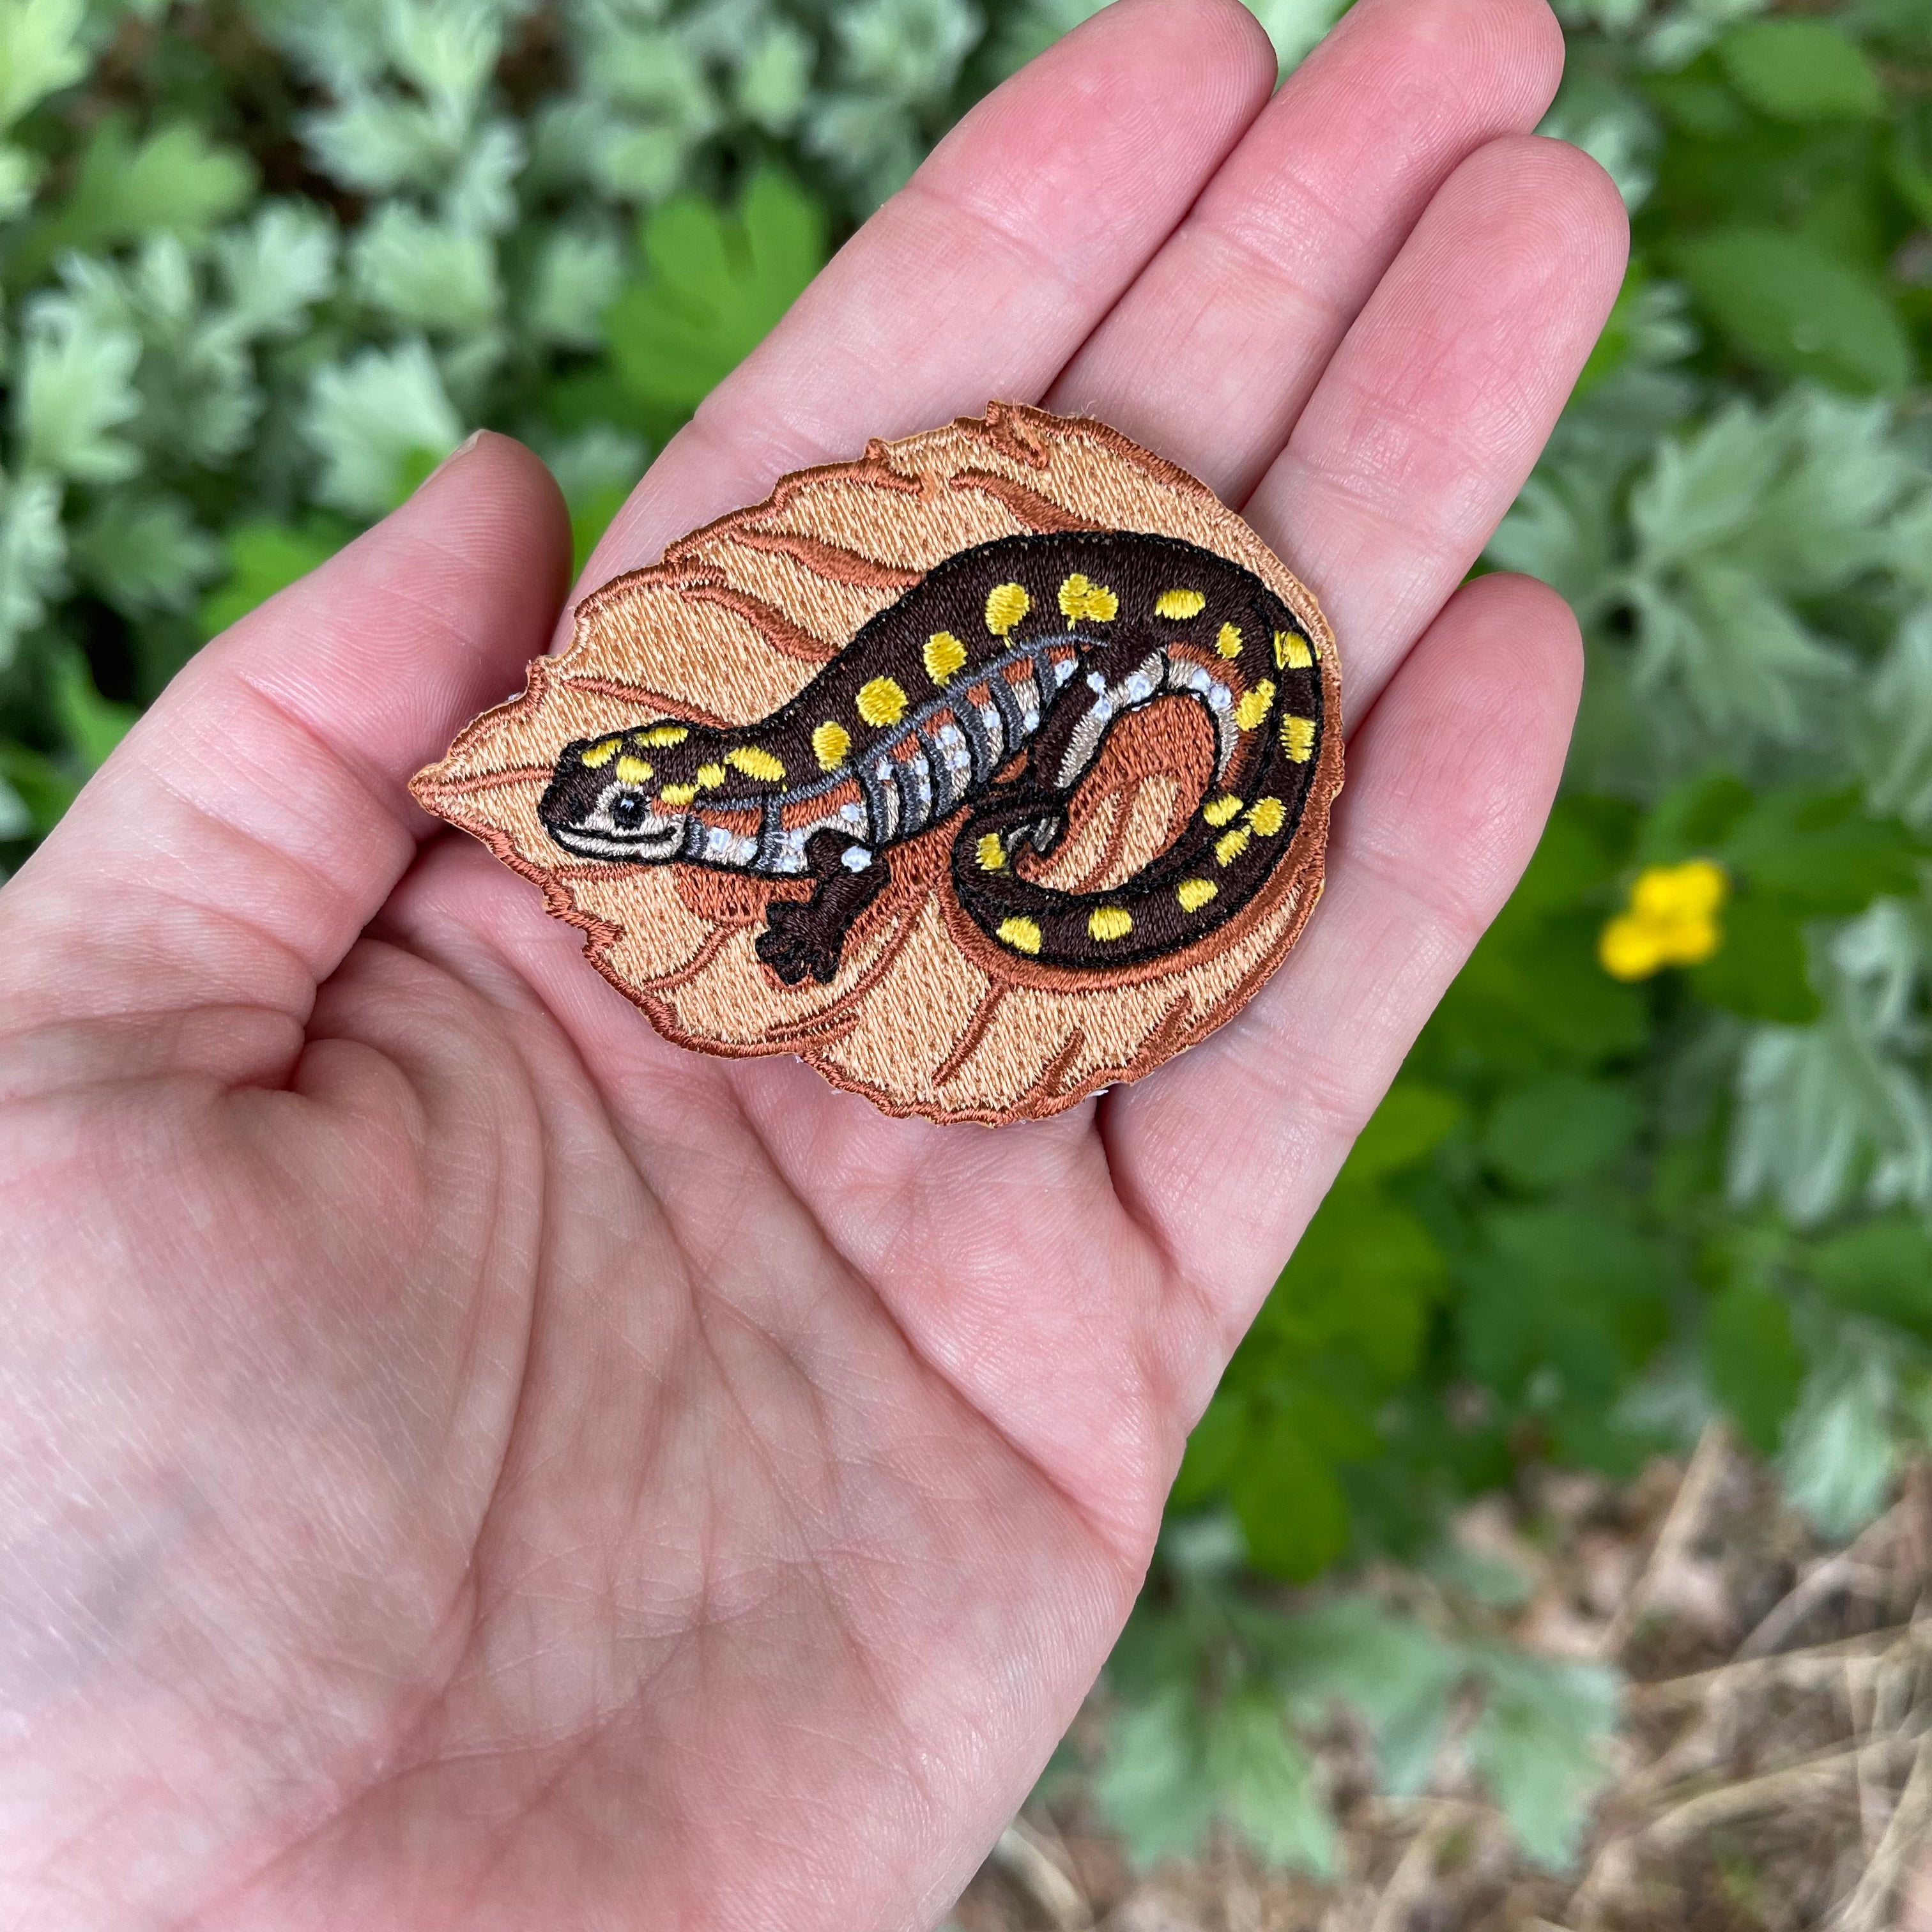 Spotted Salamander Iron-On Patch